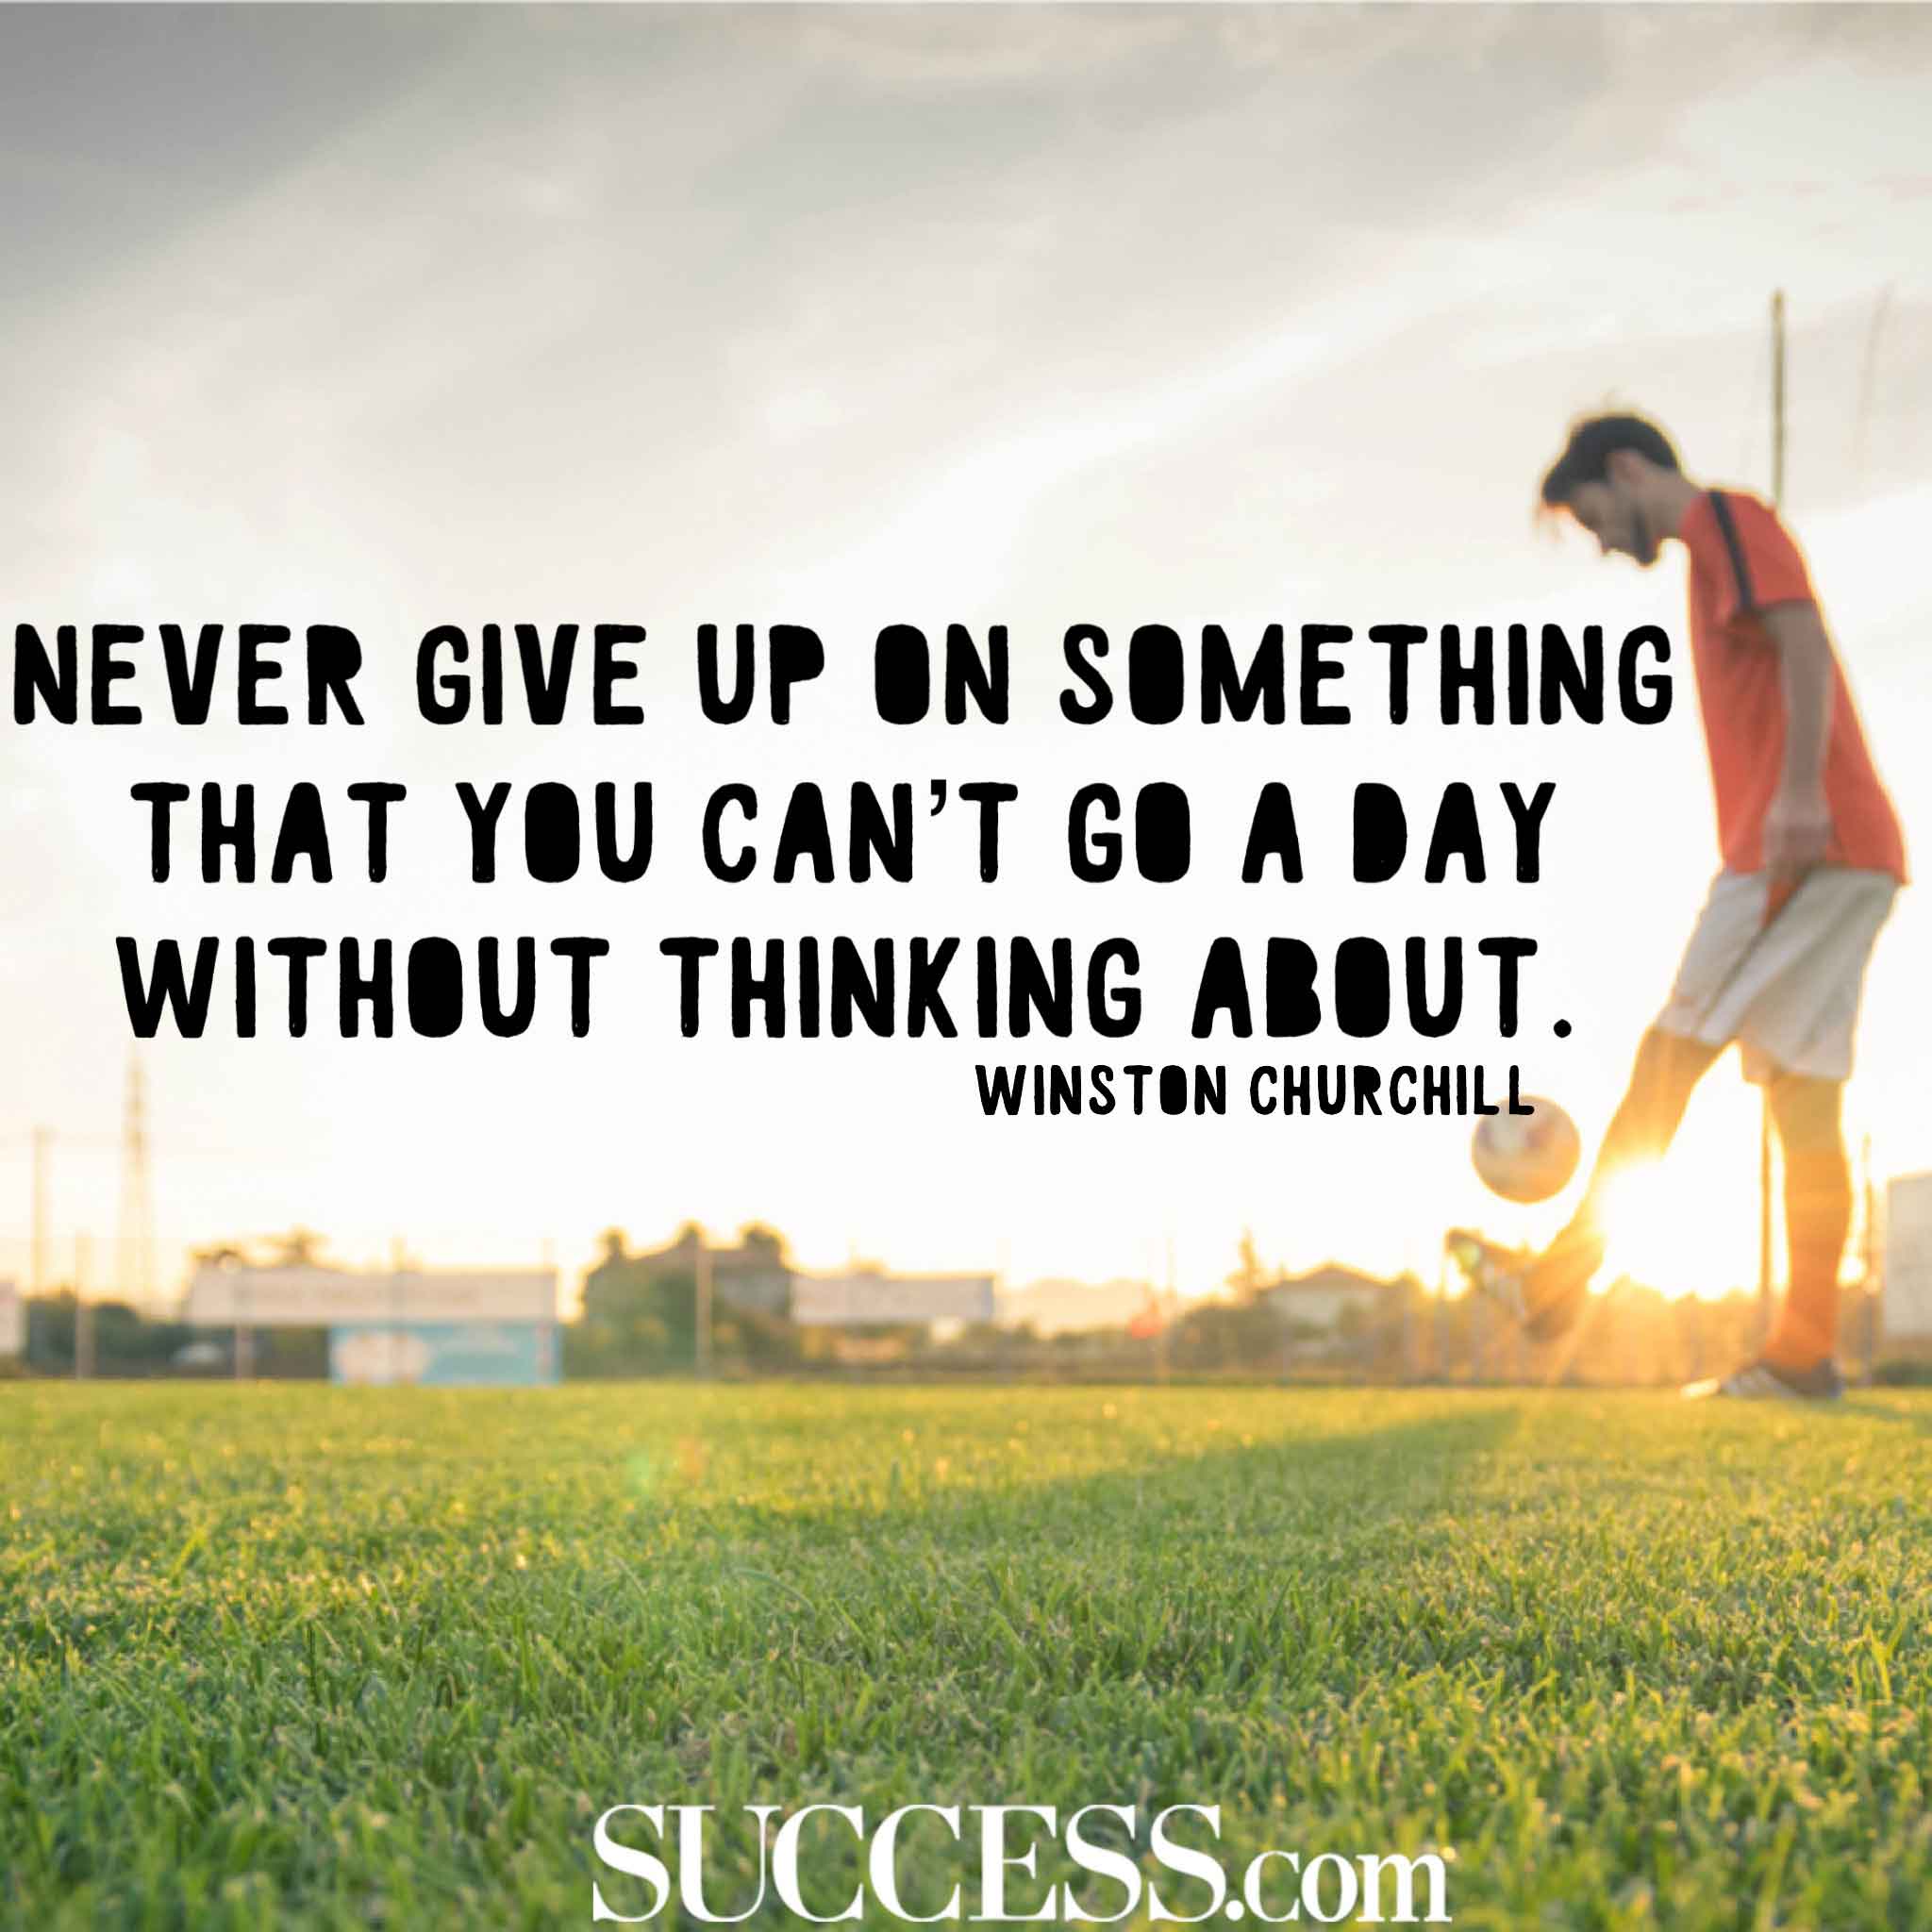 15 Inspiring Quotes About Never Giving Up | SUCCESS